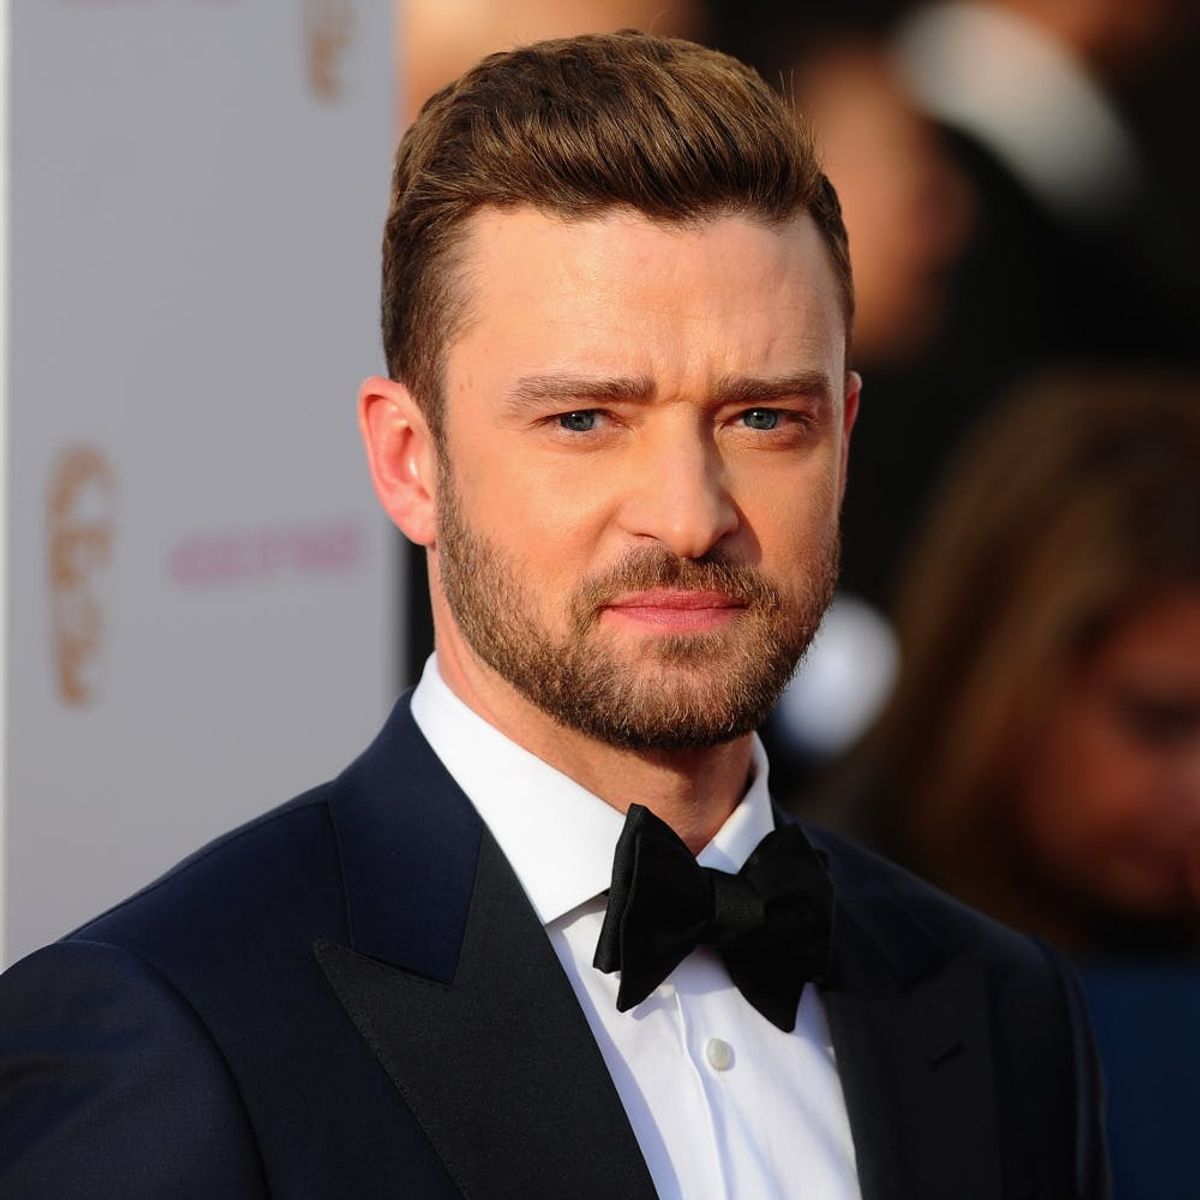 Check Out the Trailer for Justin Timberlake’s Amazing Netflix Concert Film